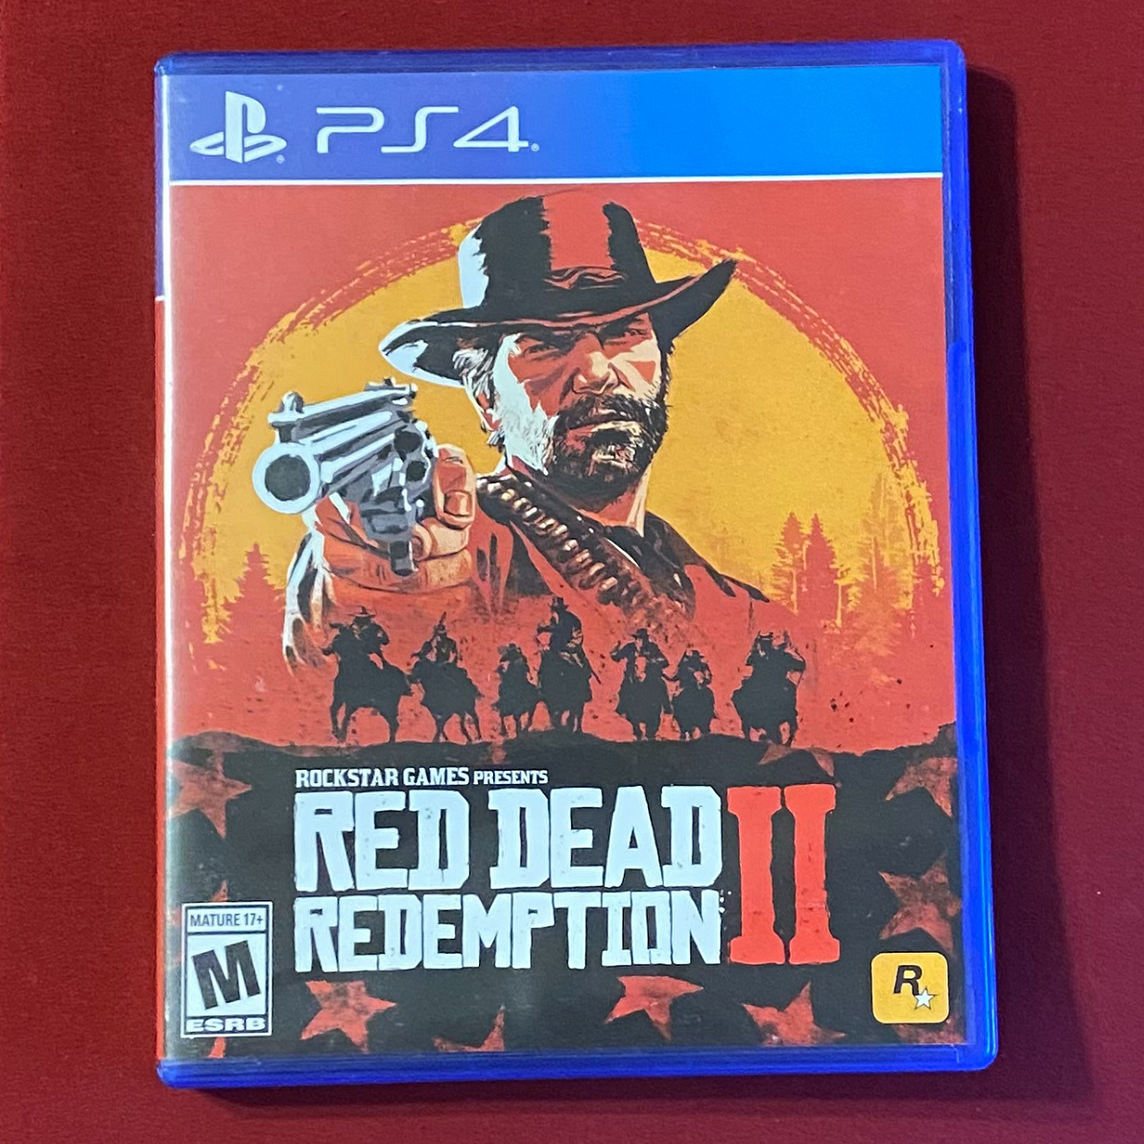 Red Dead Redemption 2: Cure for sickness, by Nikhil Nanjappa